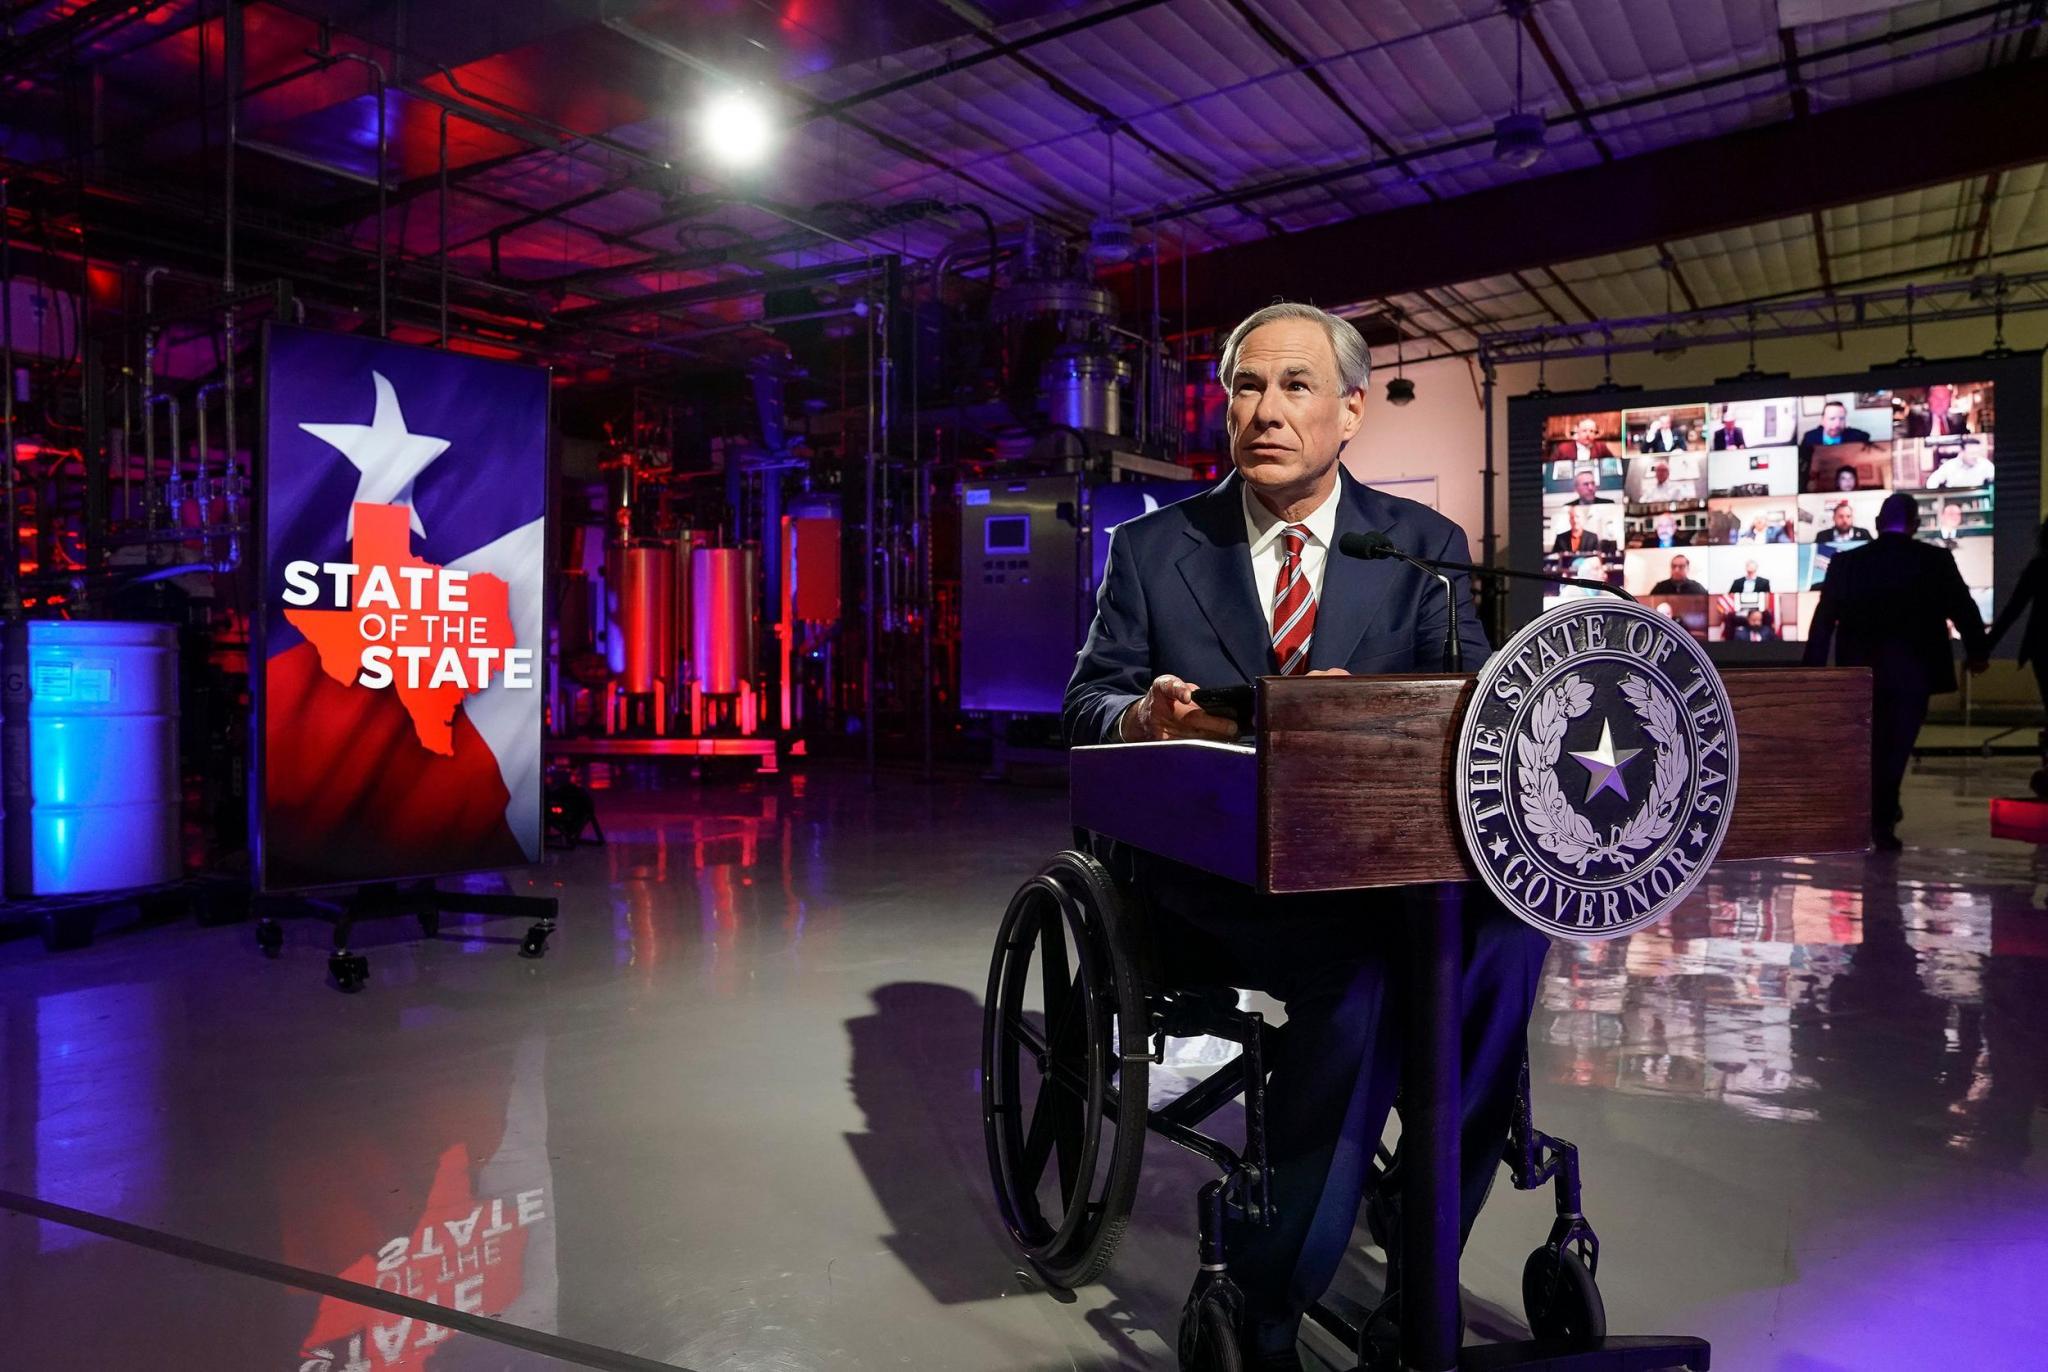 Gov. Greg Abbott unveils legislative priorities, including police funding, “election integrity,” expanding broadband access and more